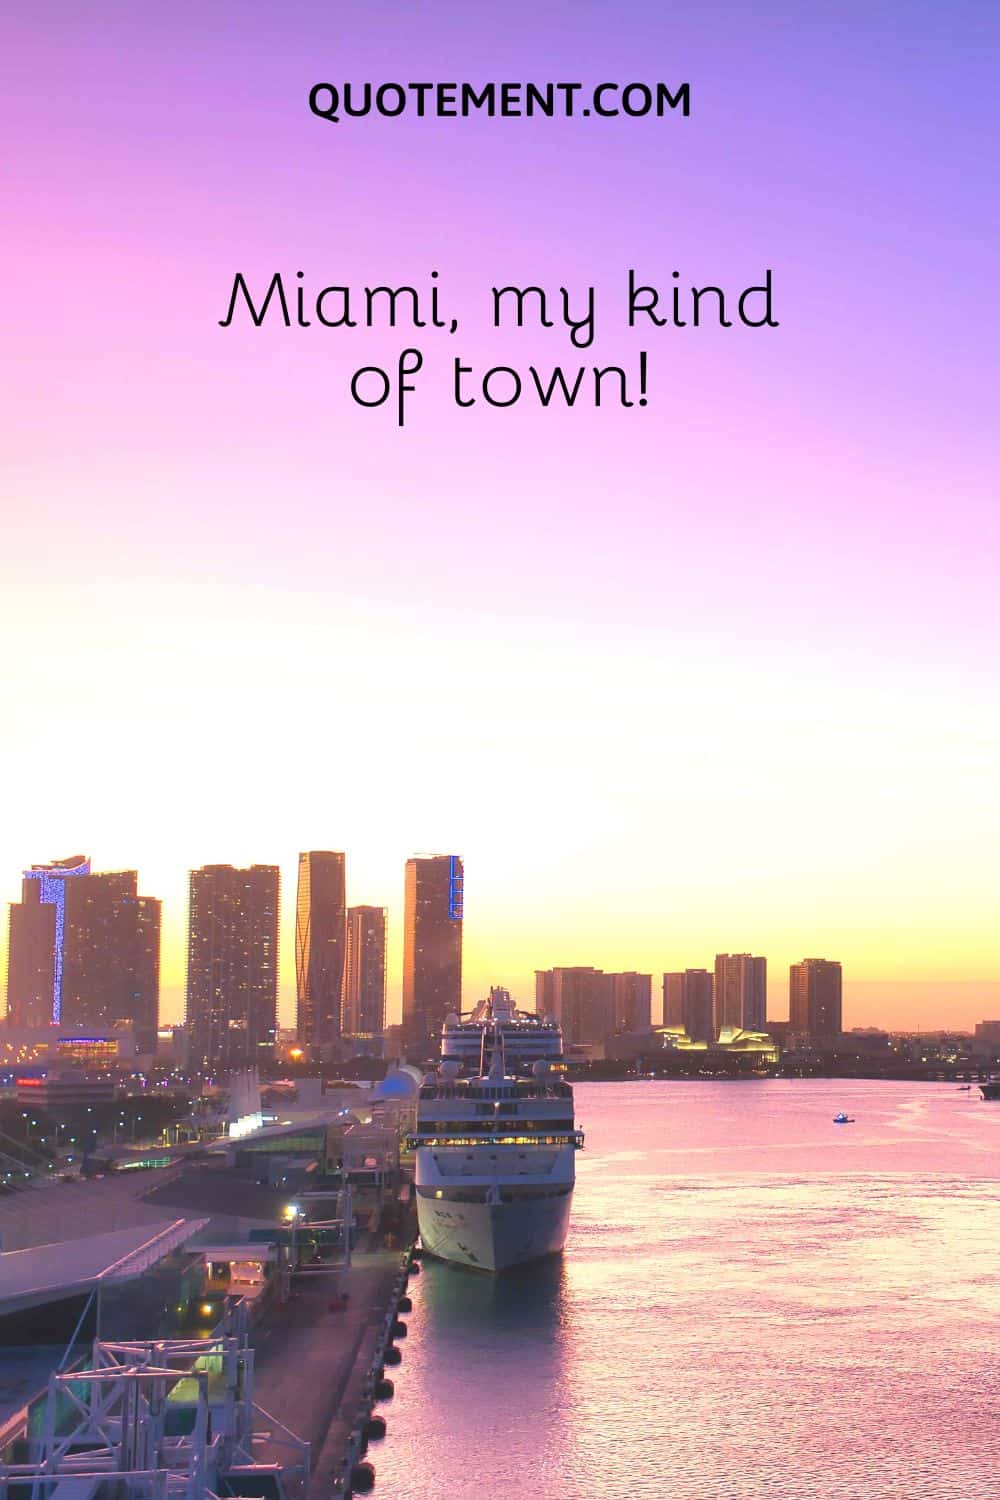 Miami, my kind of town